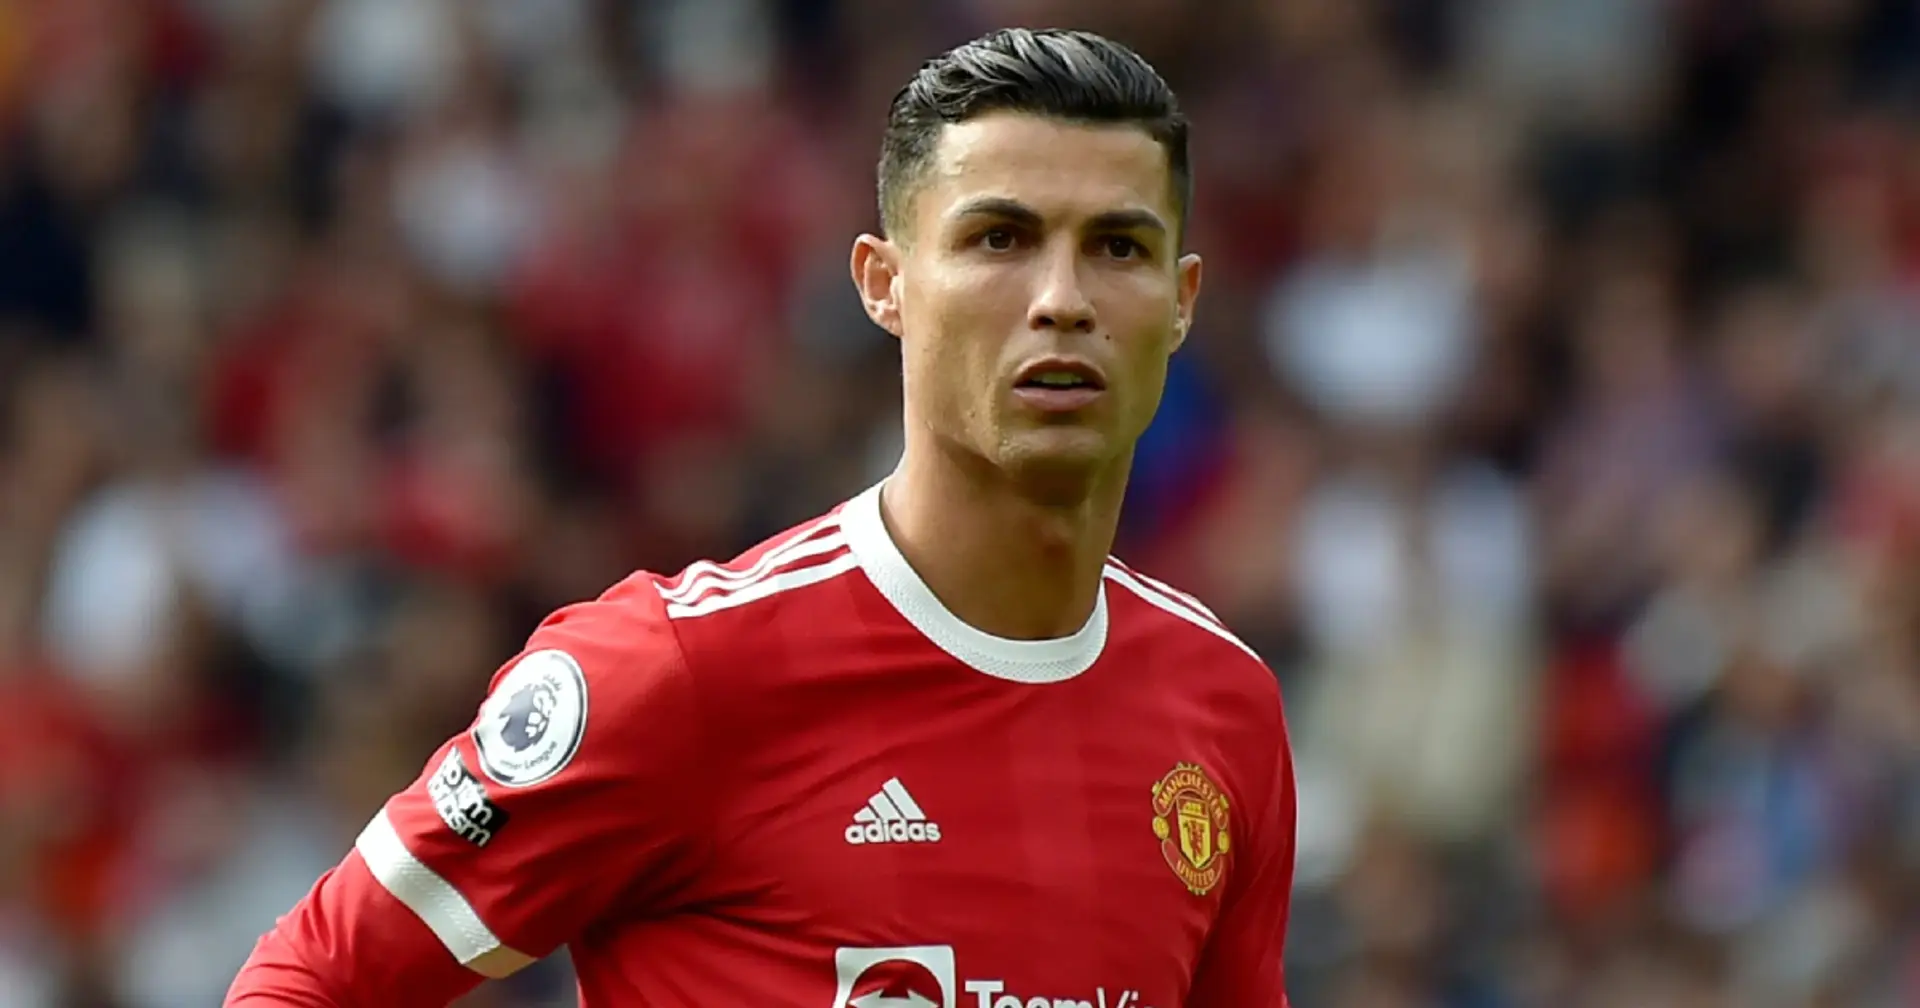 Ronaldo's lack of pressing and what it means for Man United - explained by fan